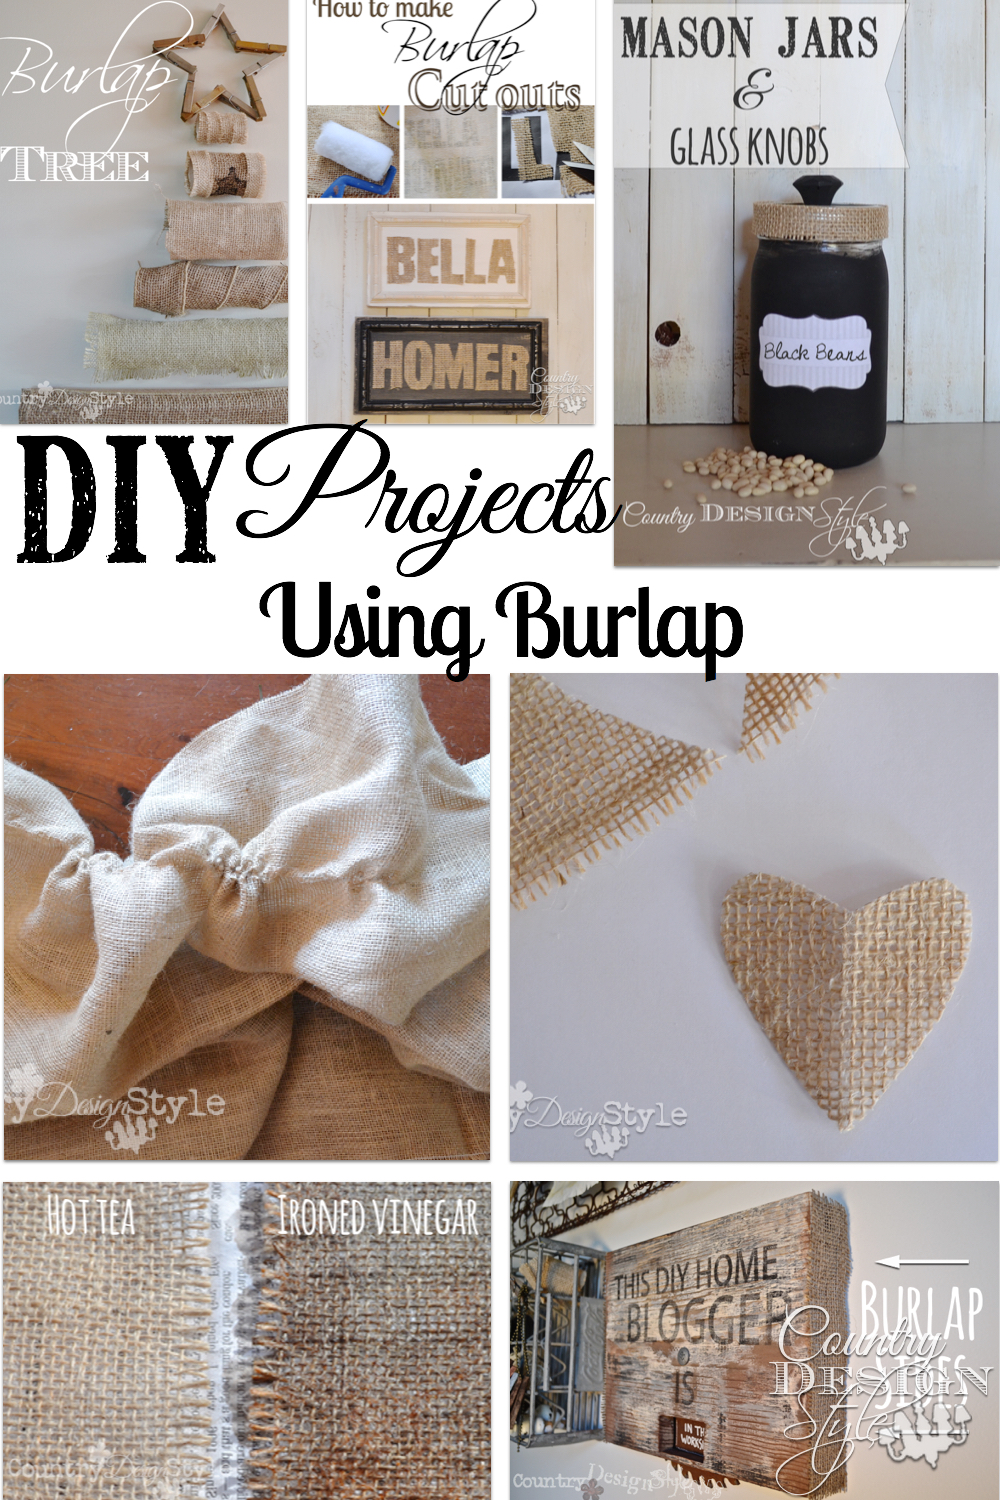 If you are passionate about burlap DIY projects, here's a of easy burlap projects collection from the website.  Country Design Style